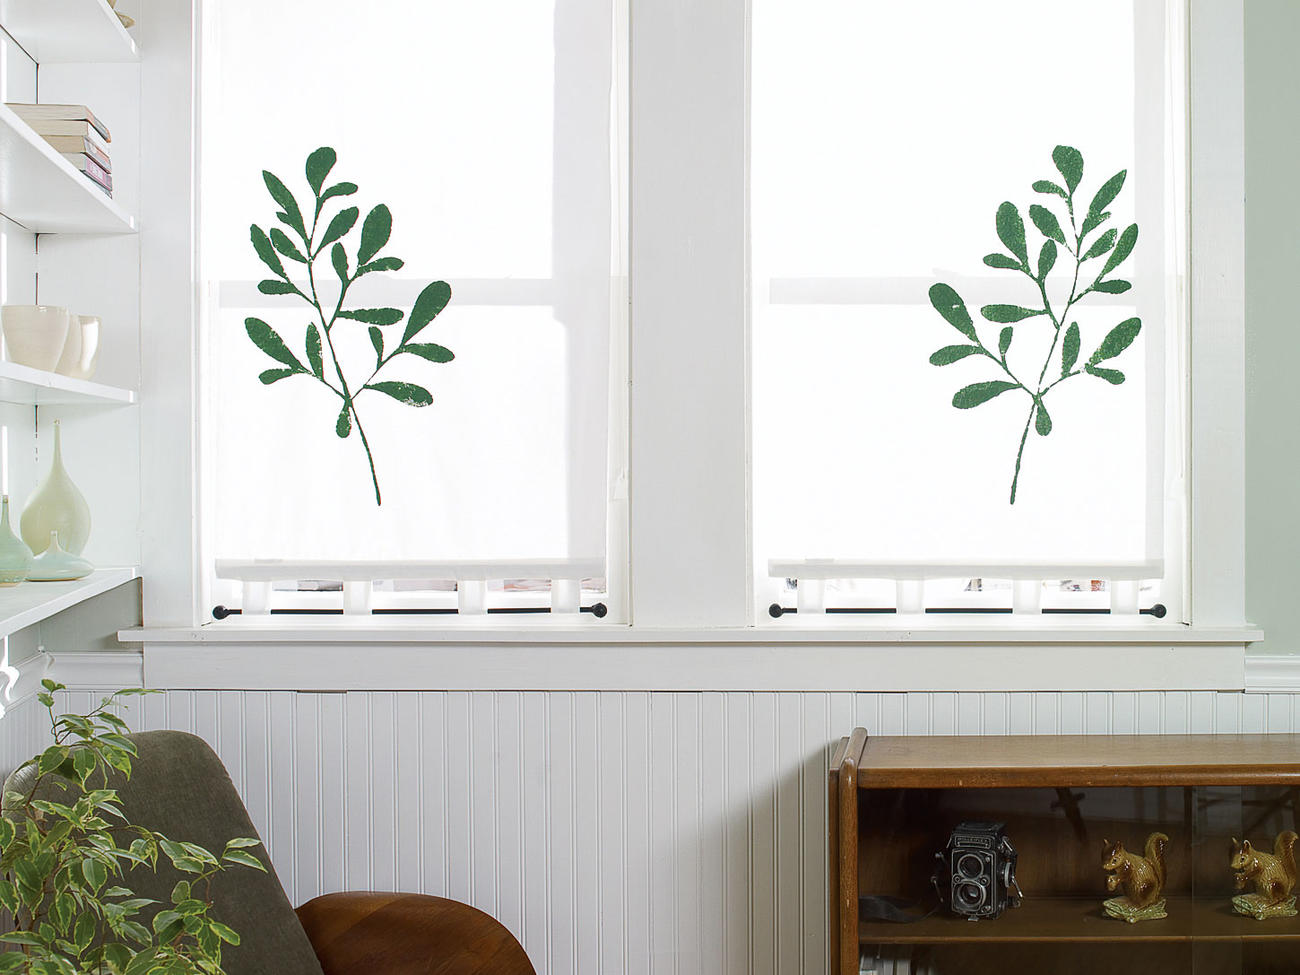 How to Stencil a Shade